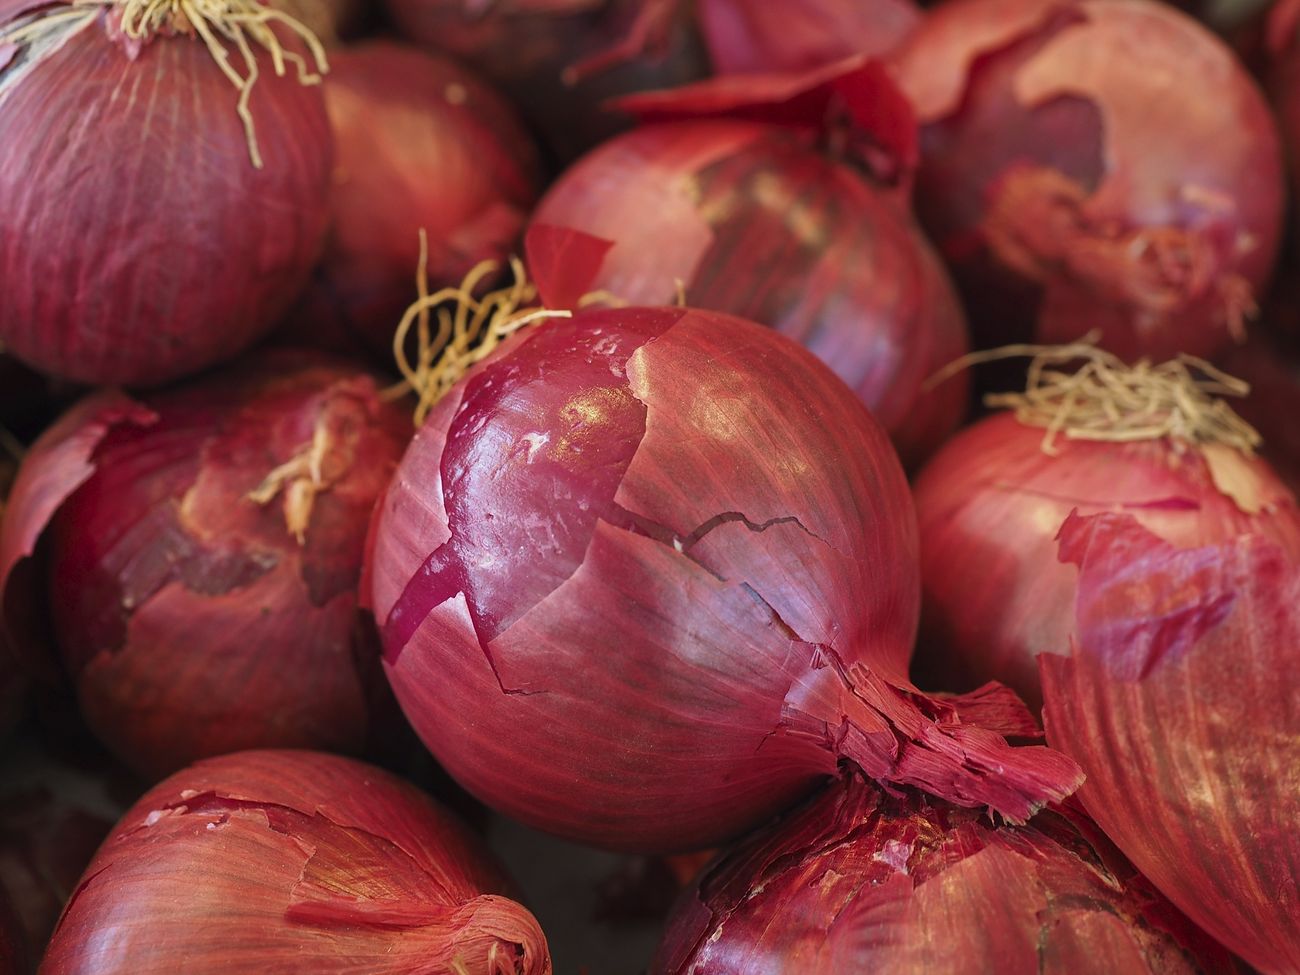 Free red onions background image